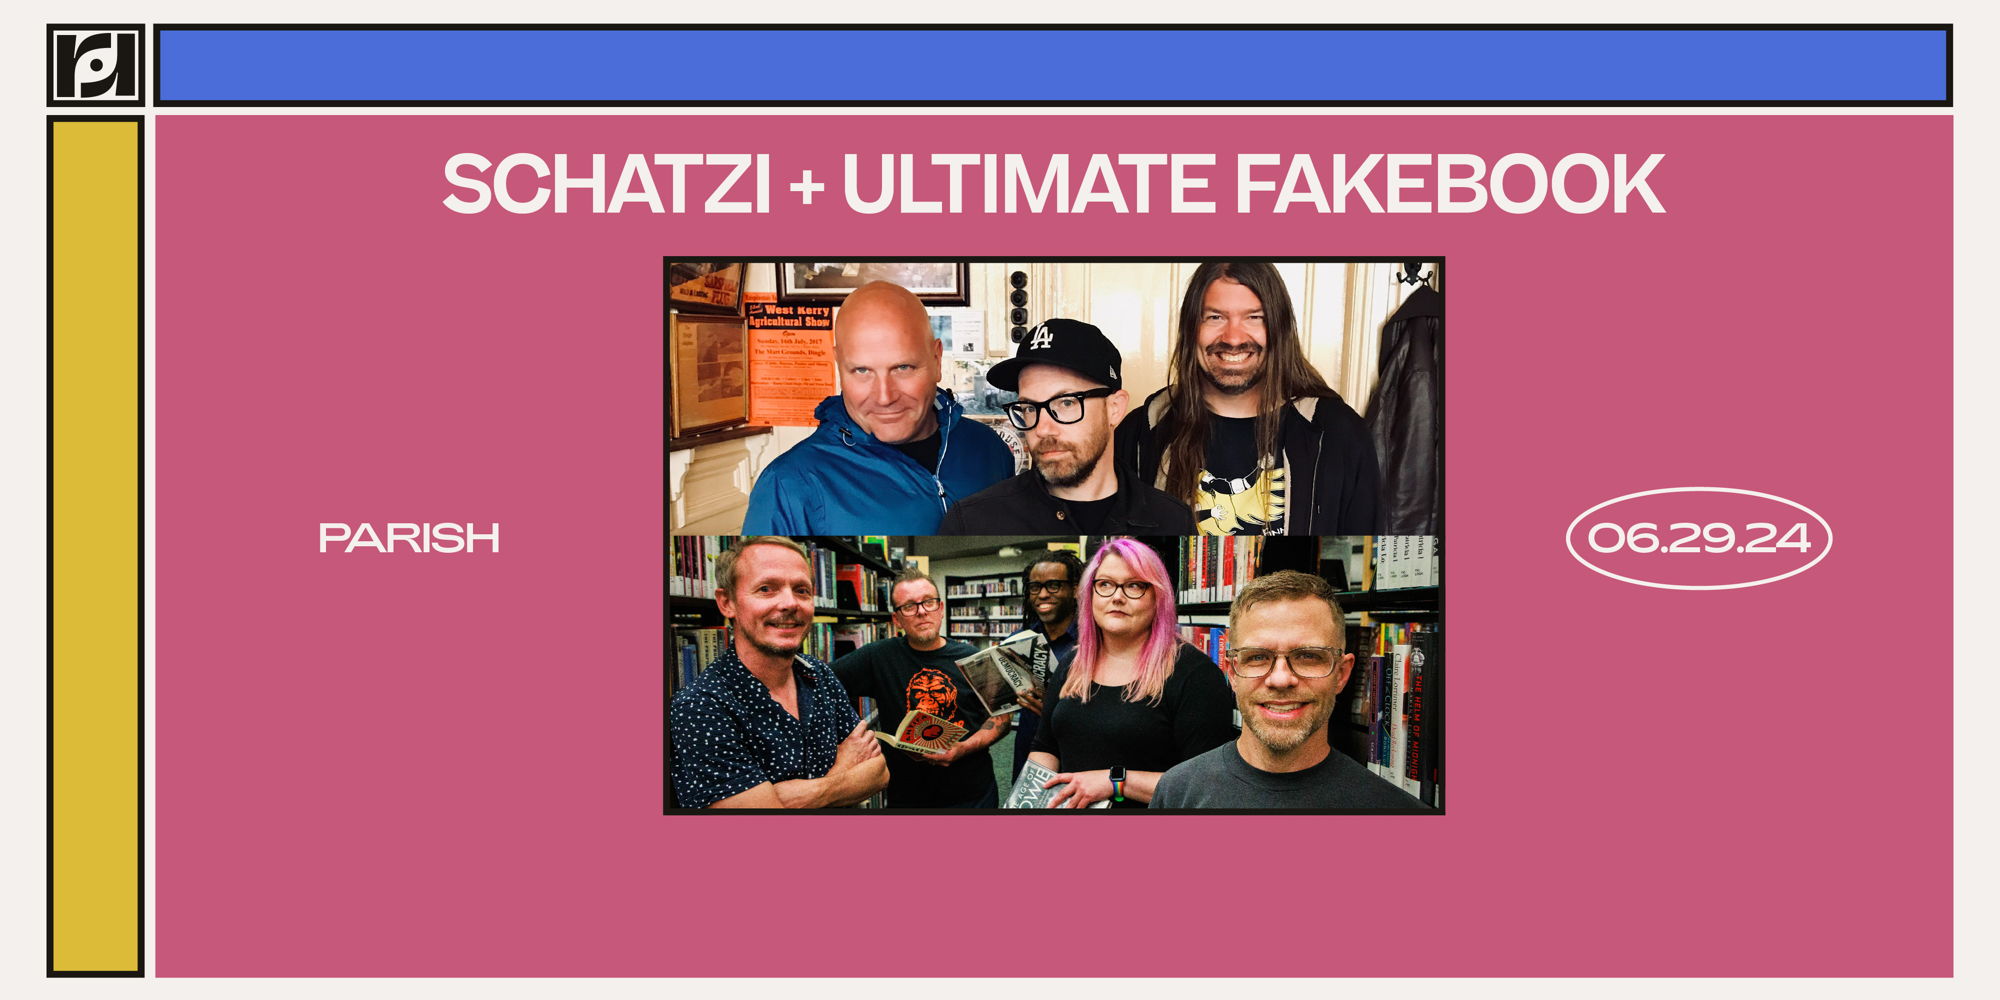 Resound Presents: Ultimate Fakebook w/ Schatzi on 6/29 at Parish promotional image